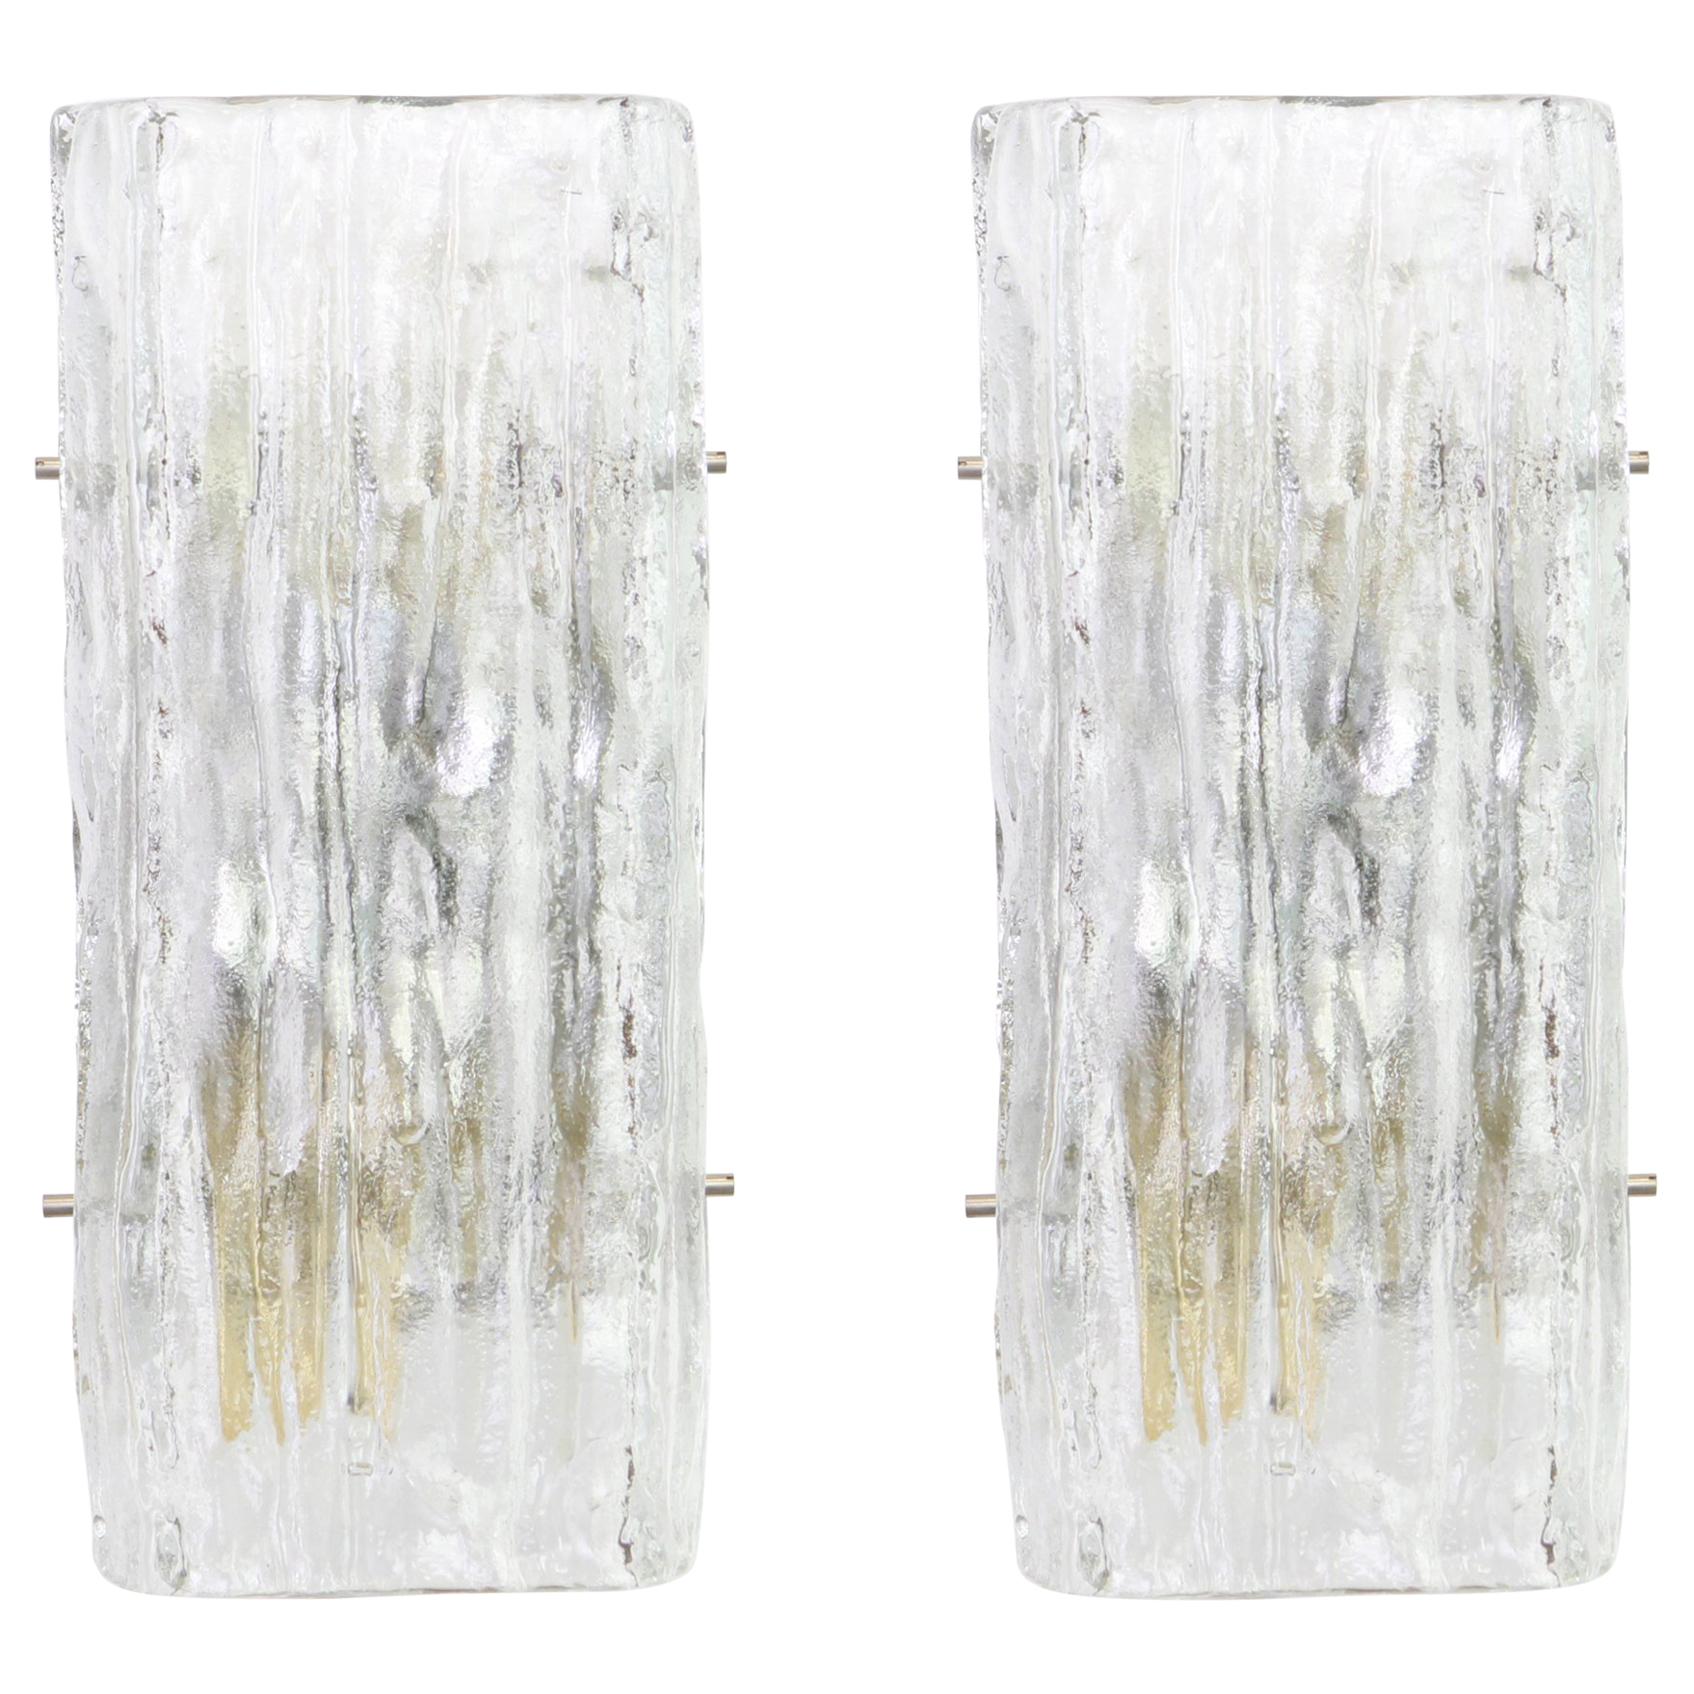 Wonderful pair of midcentury wall sconces with ice glass, made by Kalmar, Austria, manufactured, circa 1960-1969.
High quality and in very good condition. Cleaned, well-wired and ready to use.  

The fixture requires 2 x E14 standard bulbs with